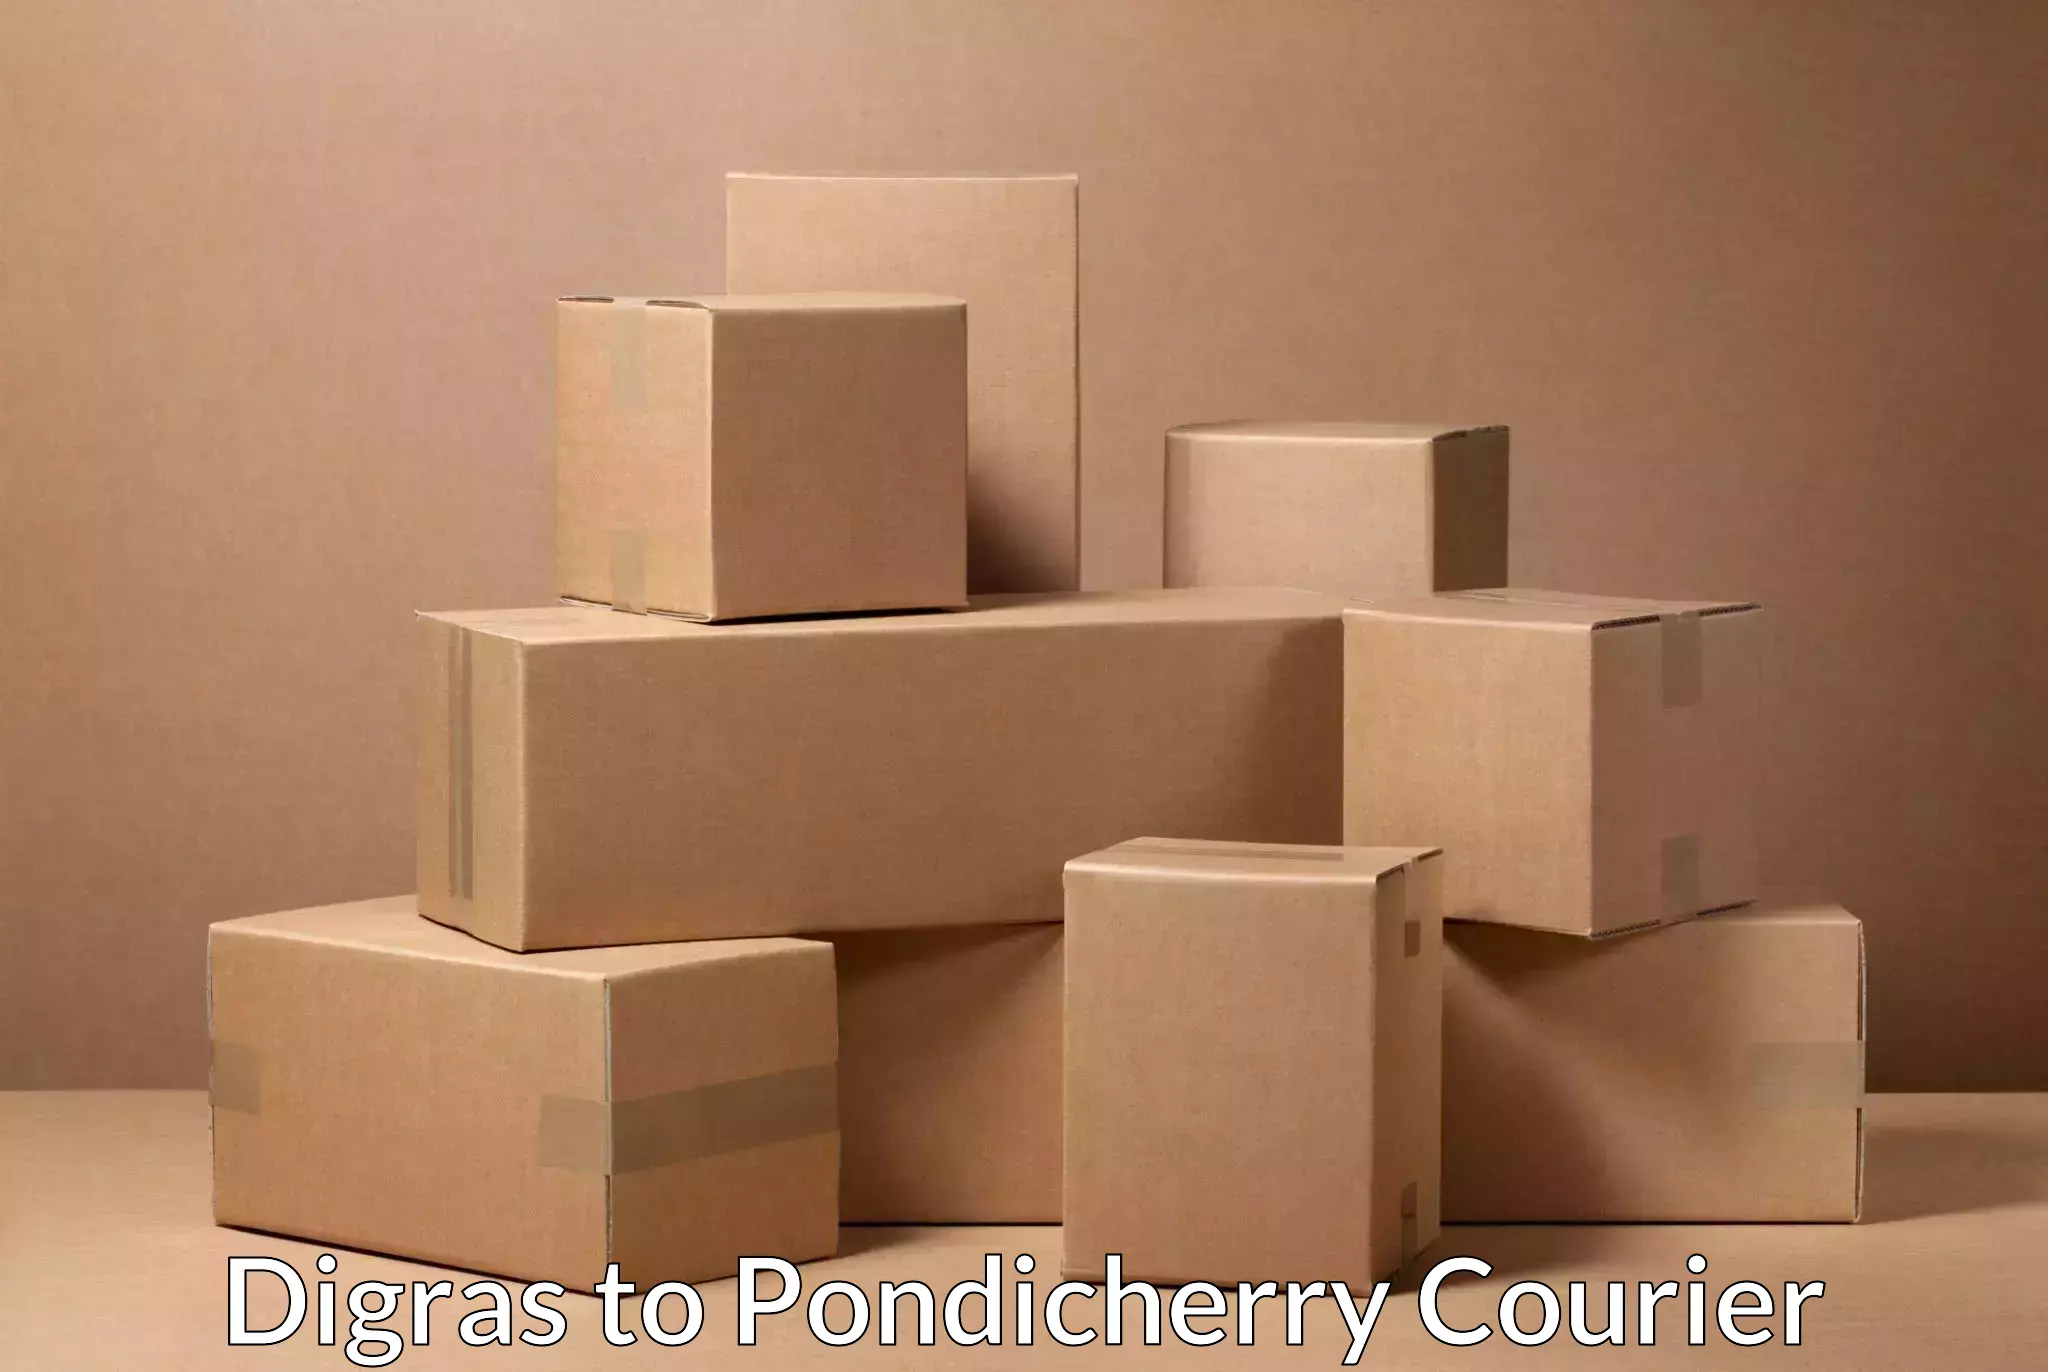 Parcel handling and care Digras to Pondicherry University